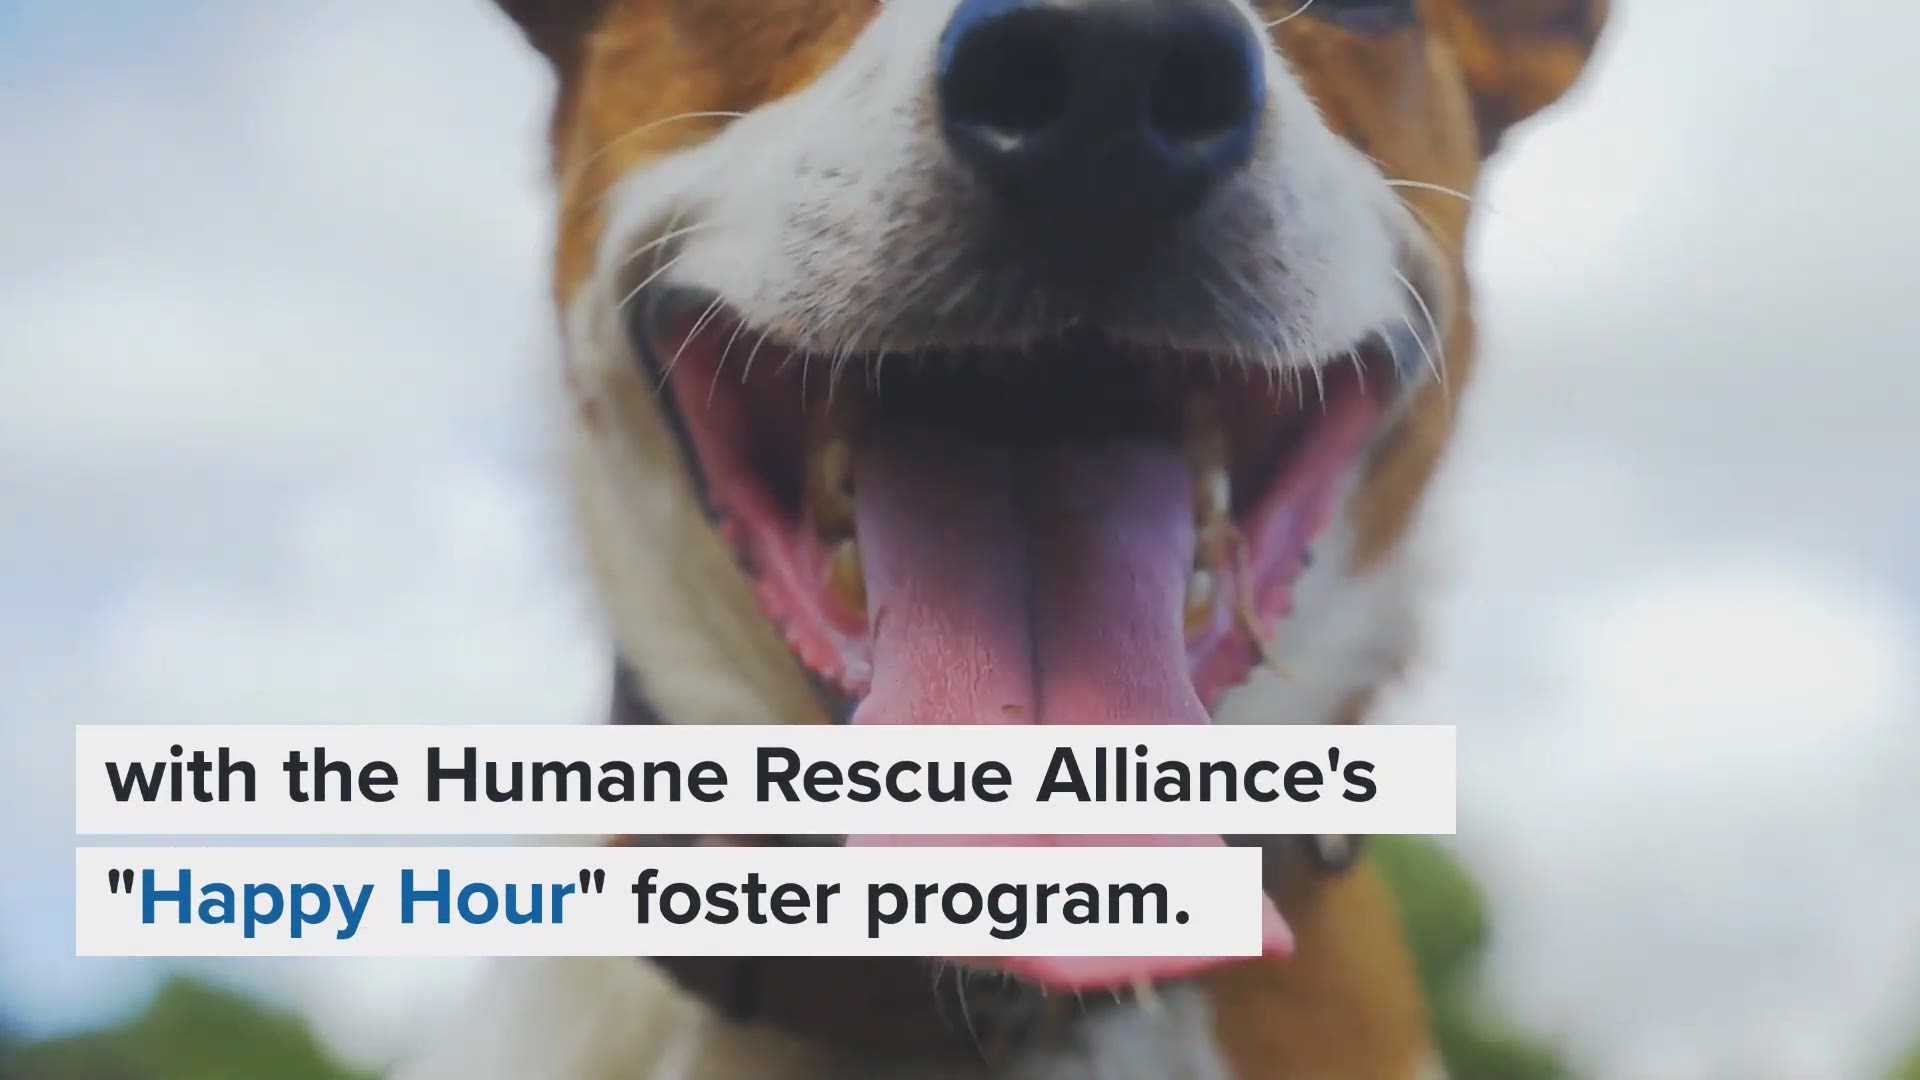 The Humane Rescue Alliance has a new "Happy Hour" foster program.